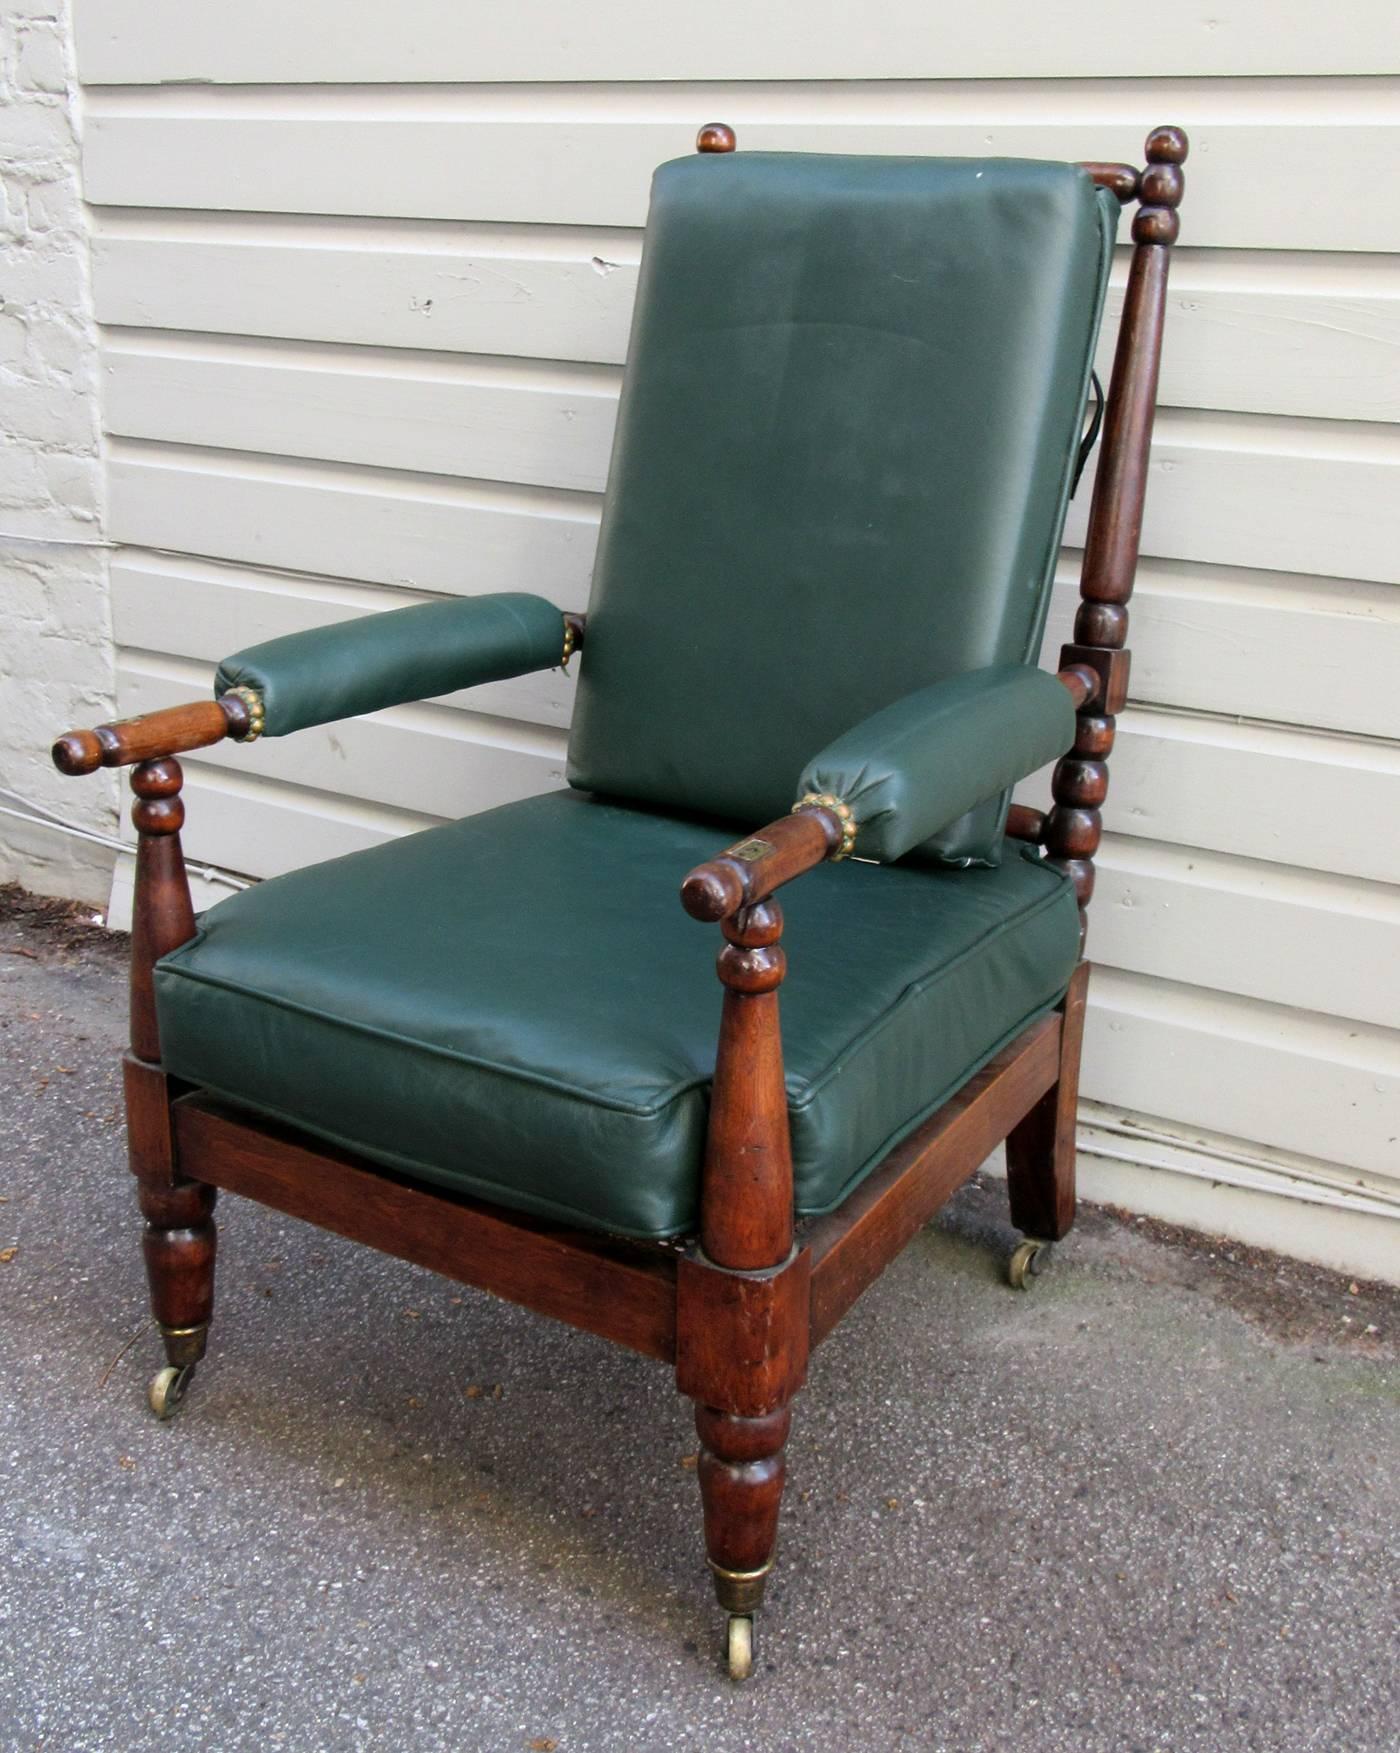 Georgian Early 19th Century English Mahogany Bobbin Turned Library Chair with Casters